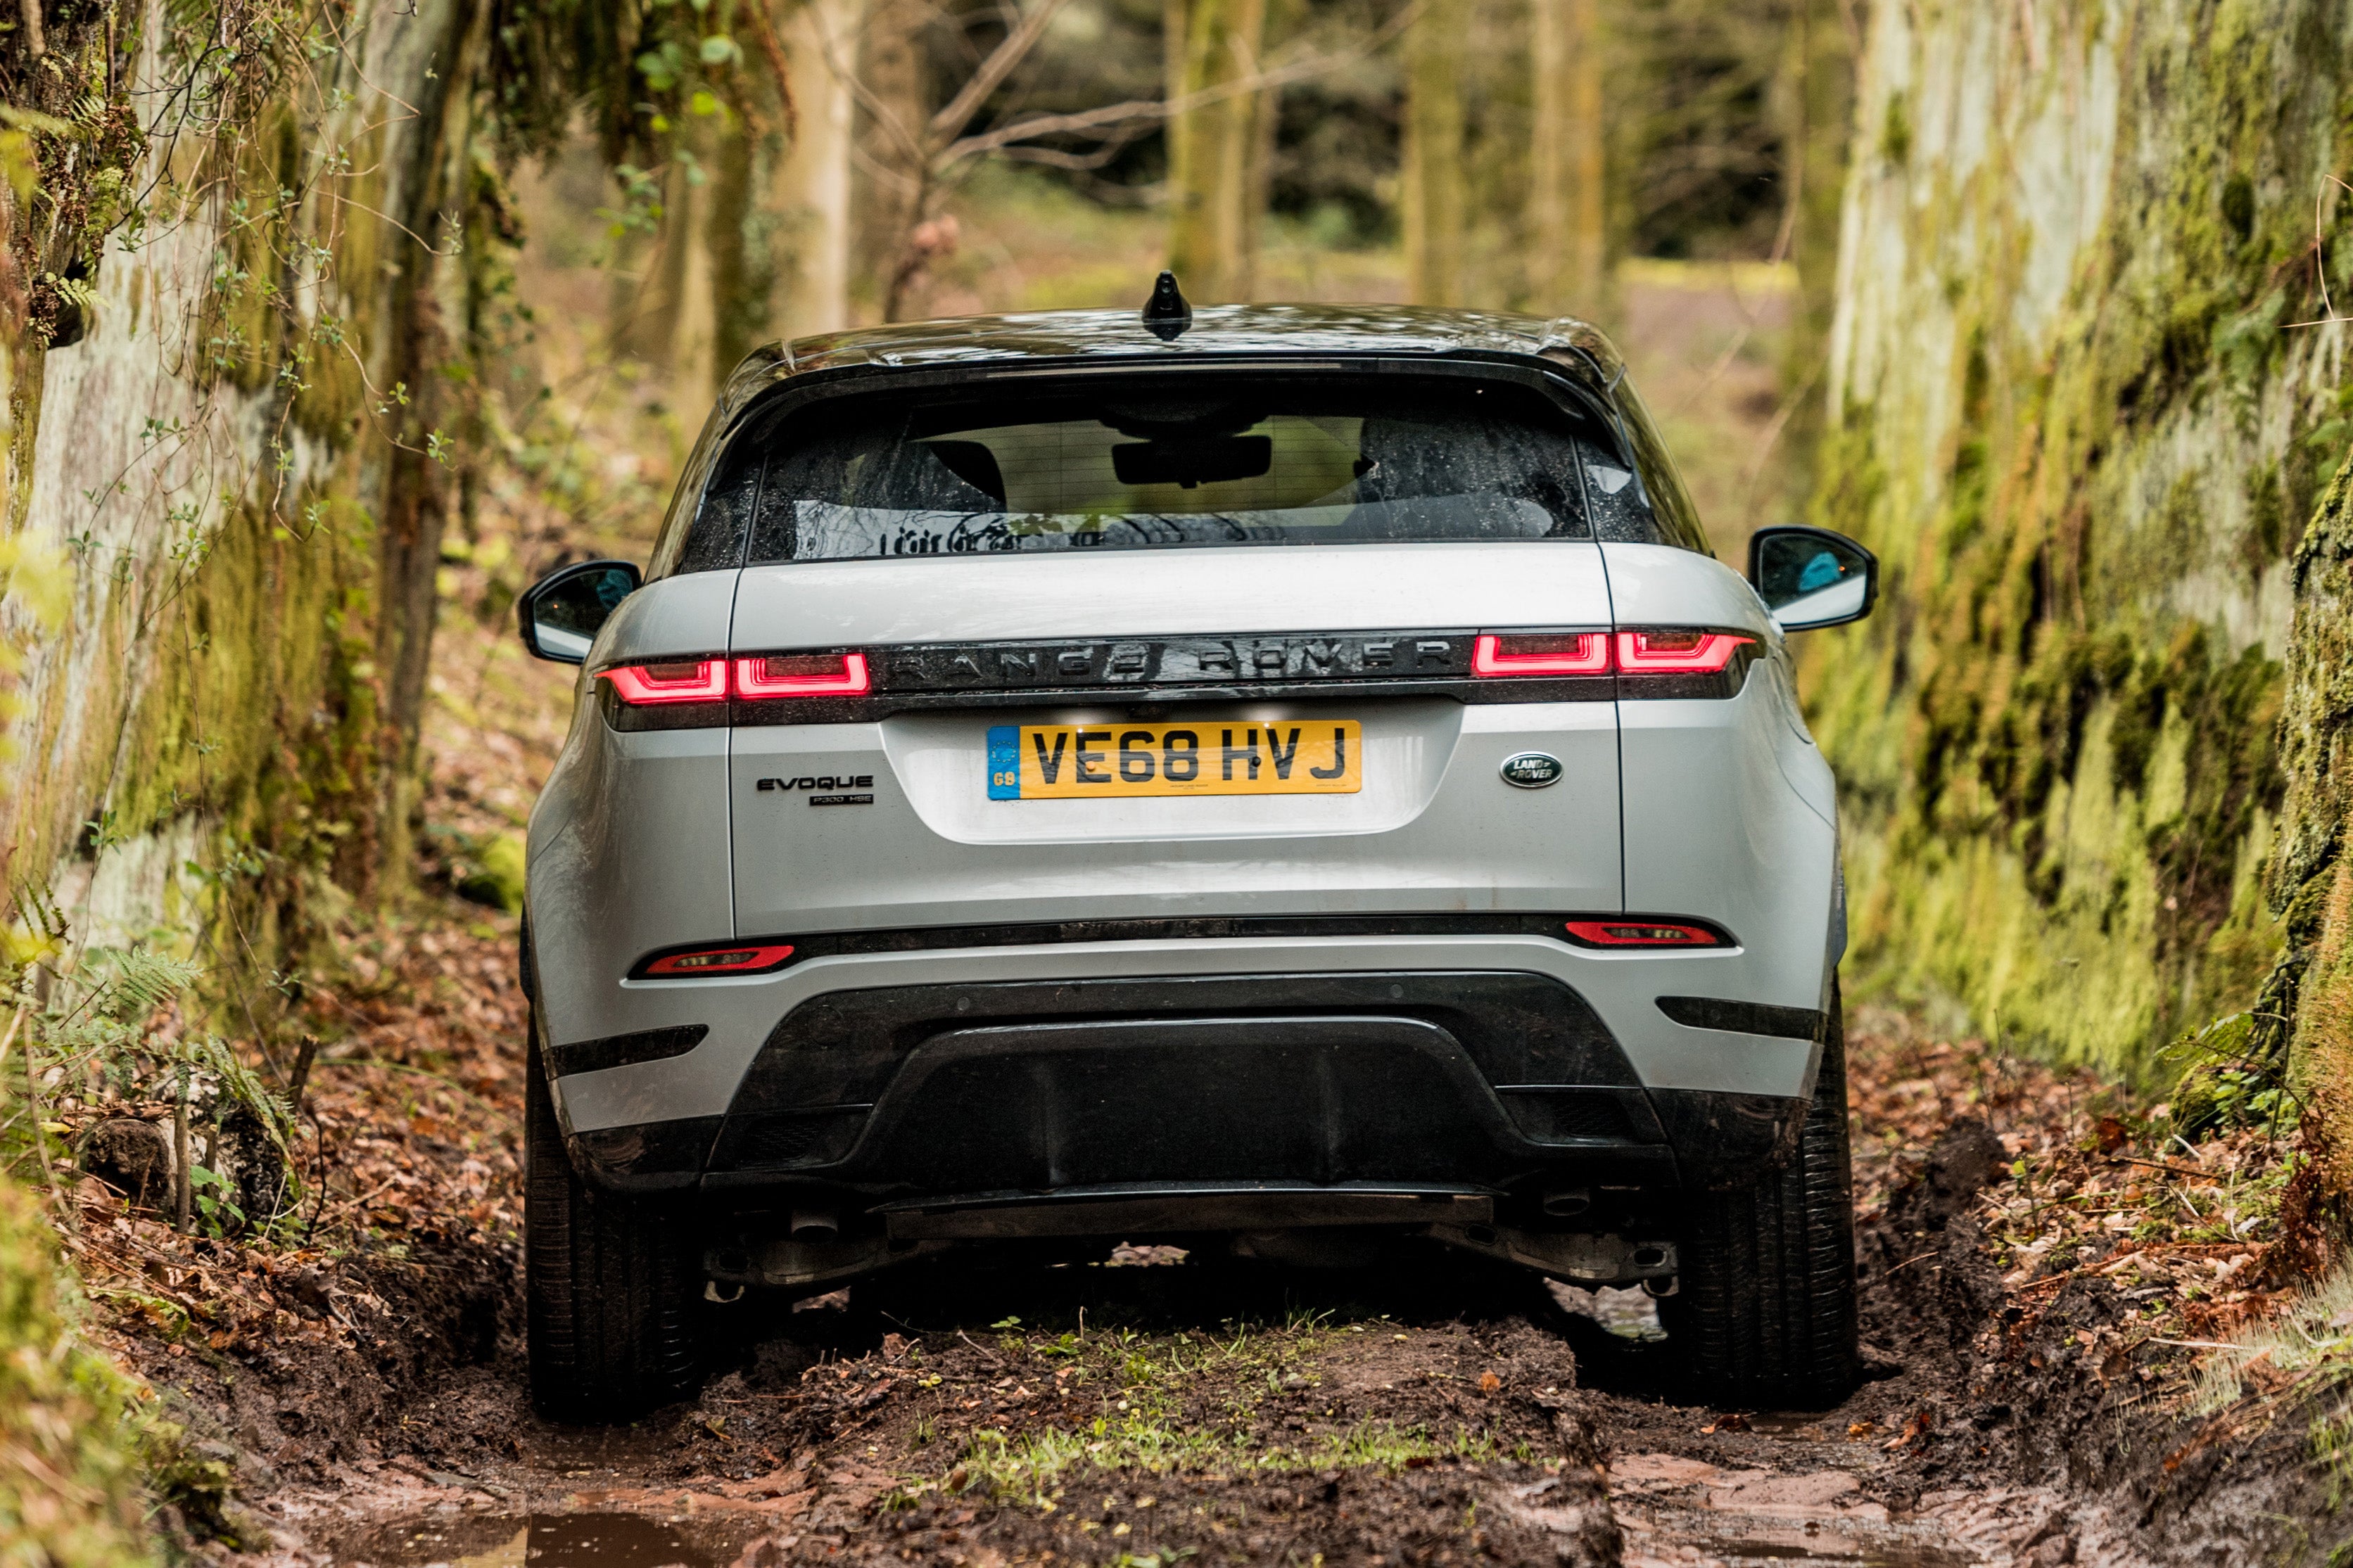 Range Rover Evoque Review 2022: rear off-road